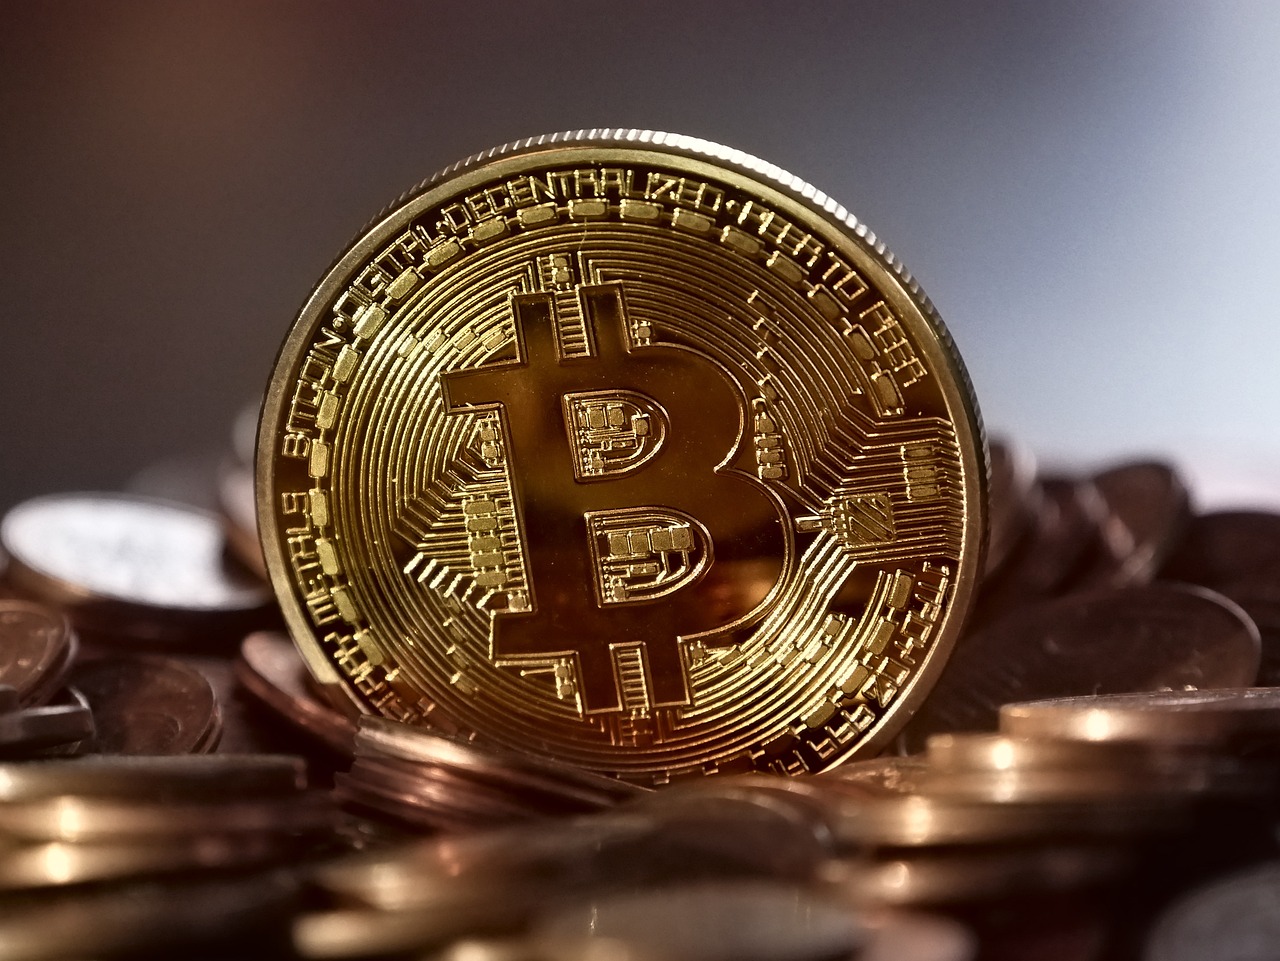 Bitcoin The Digital Currency Revolutionizing the Financial World